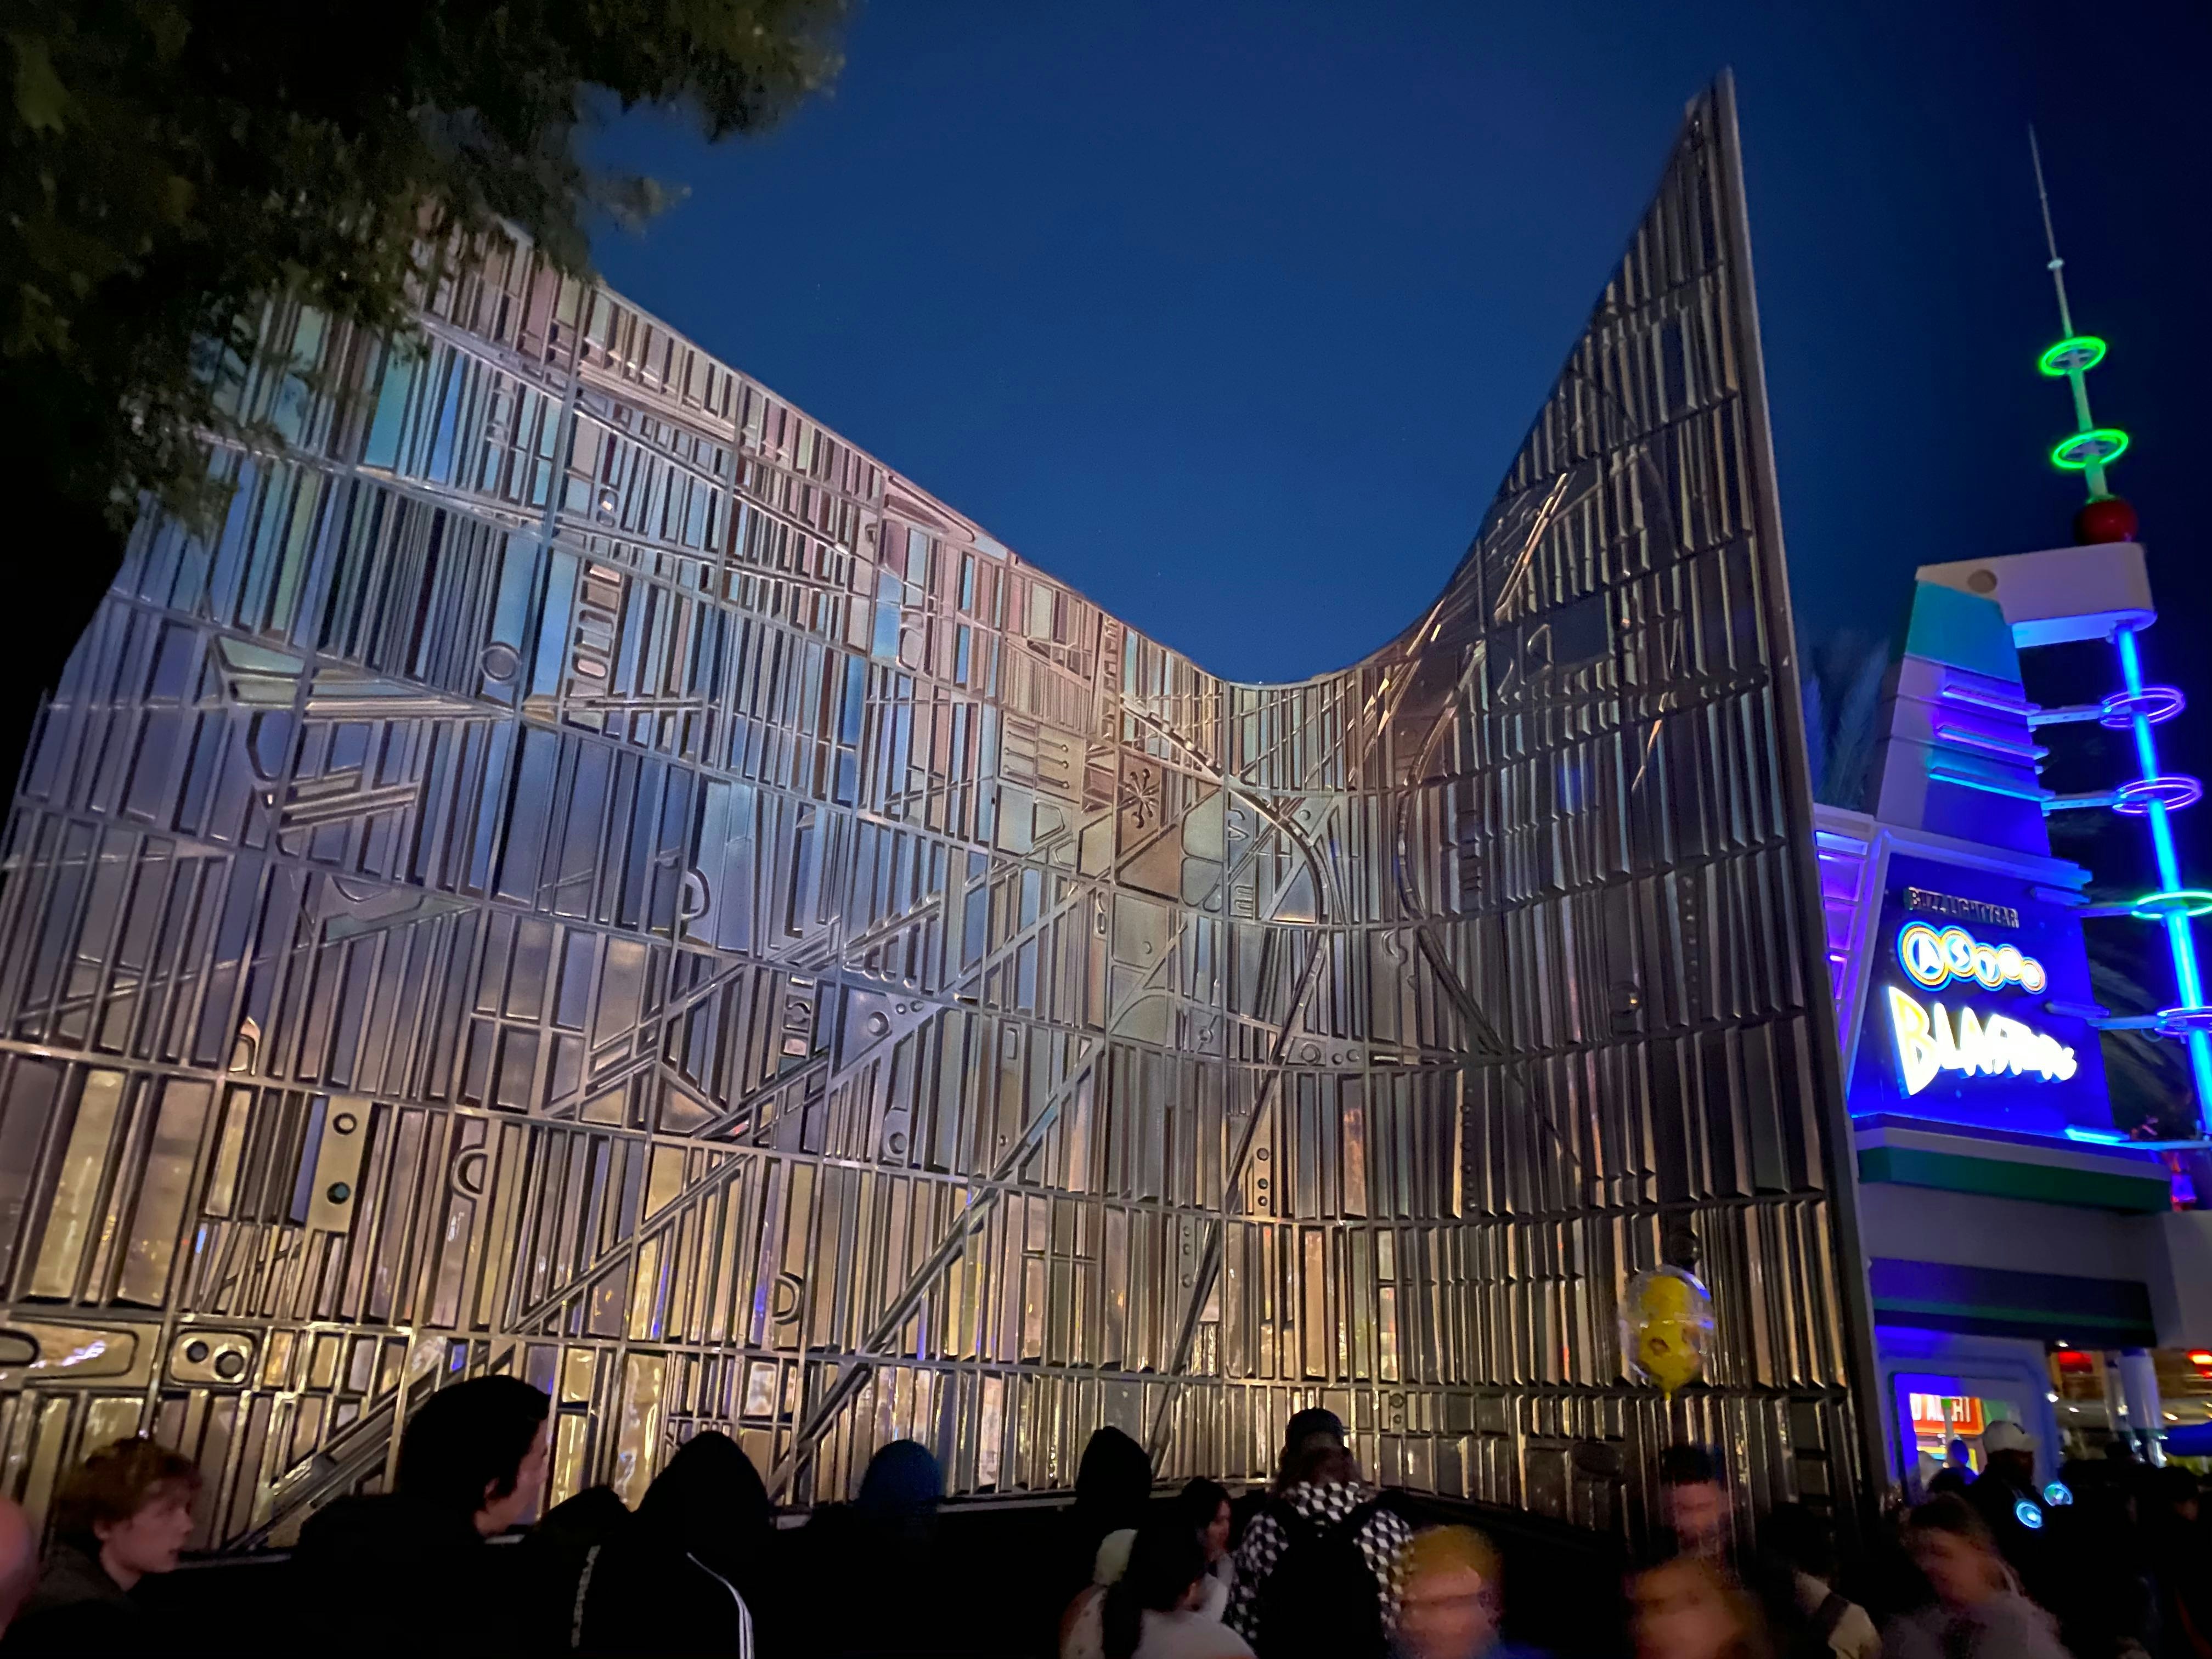 More Space-Age Inspired Tomorrowland Entrance Walls Unveiled at Disneyland Park